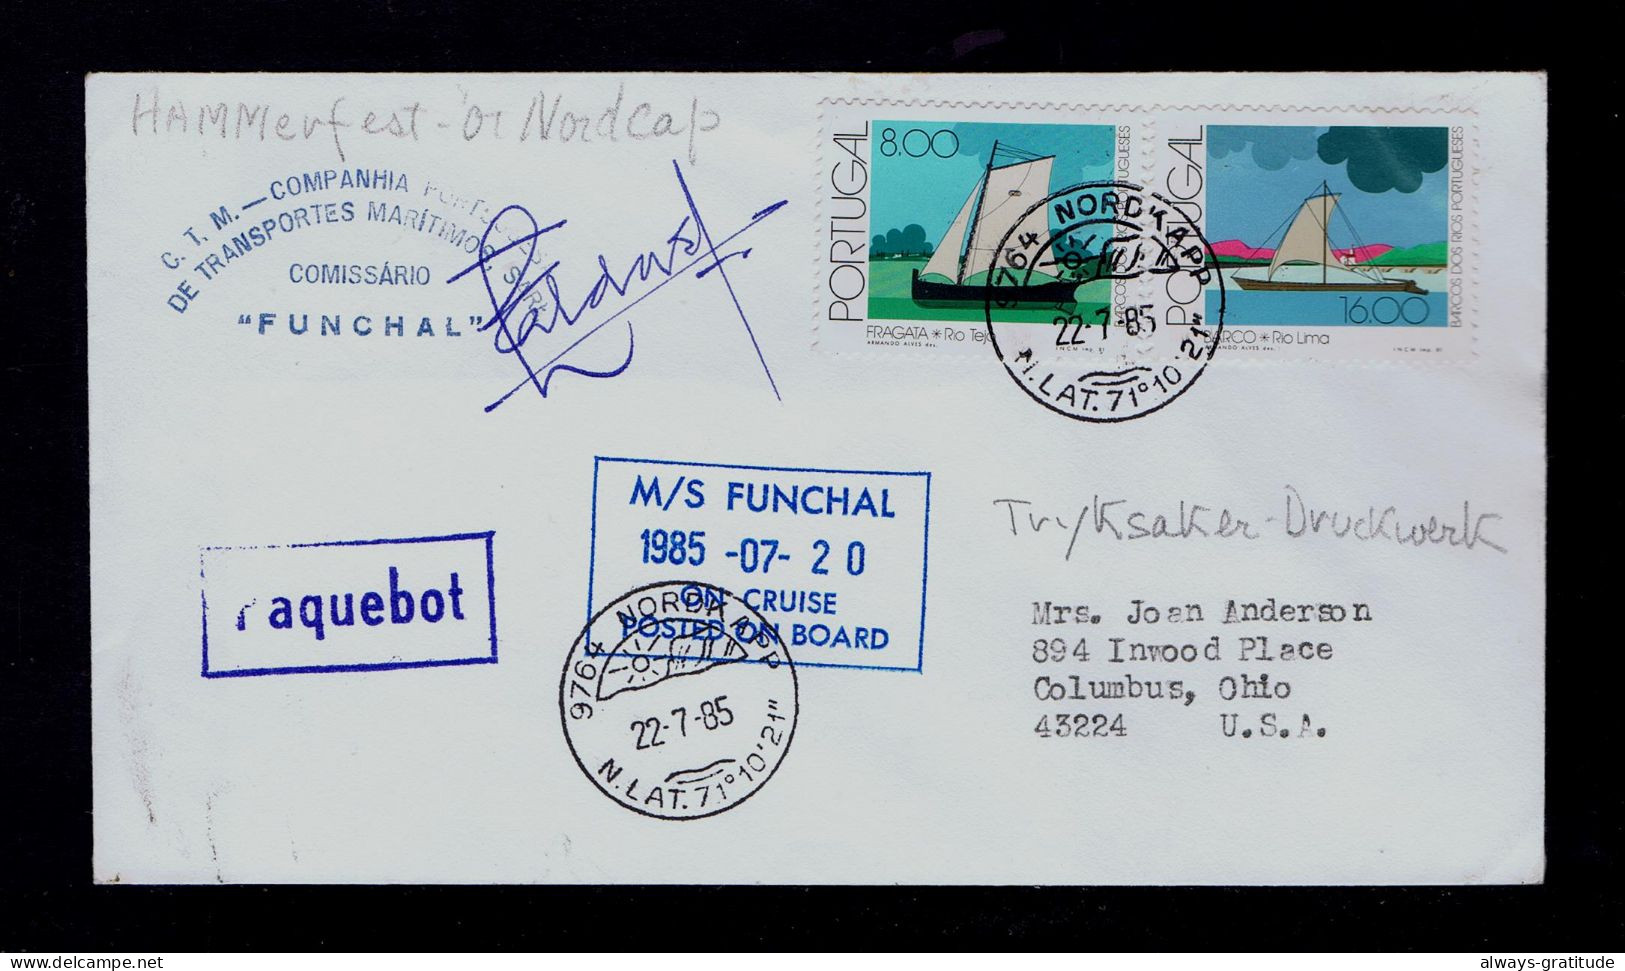 Sp10539 MADEIRA Island (FUNCHAL 1985 Posted On Board /cruise) Paquebot Portugal Mailed Ohio -US - Sonstige (See)